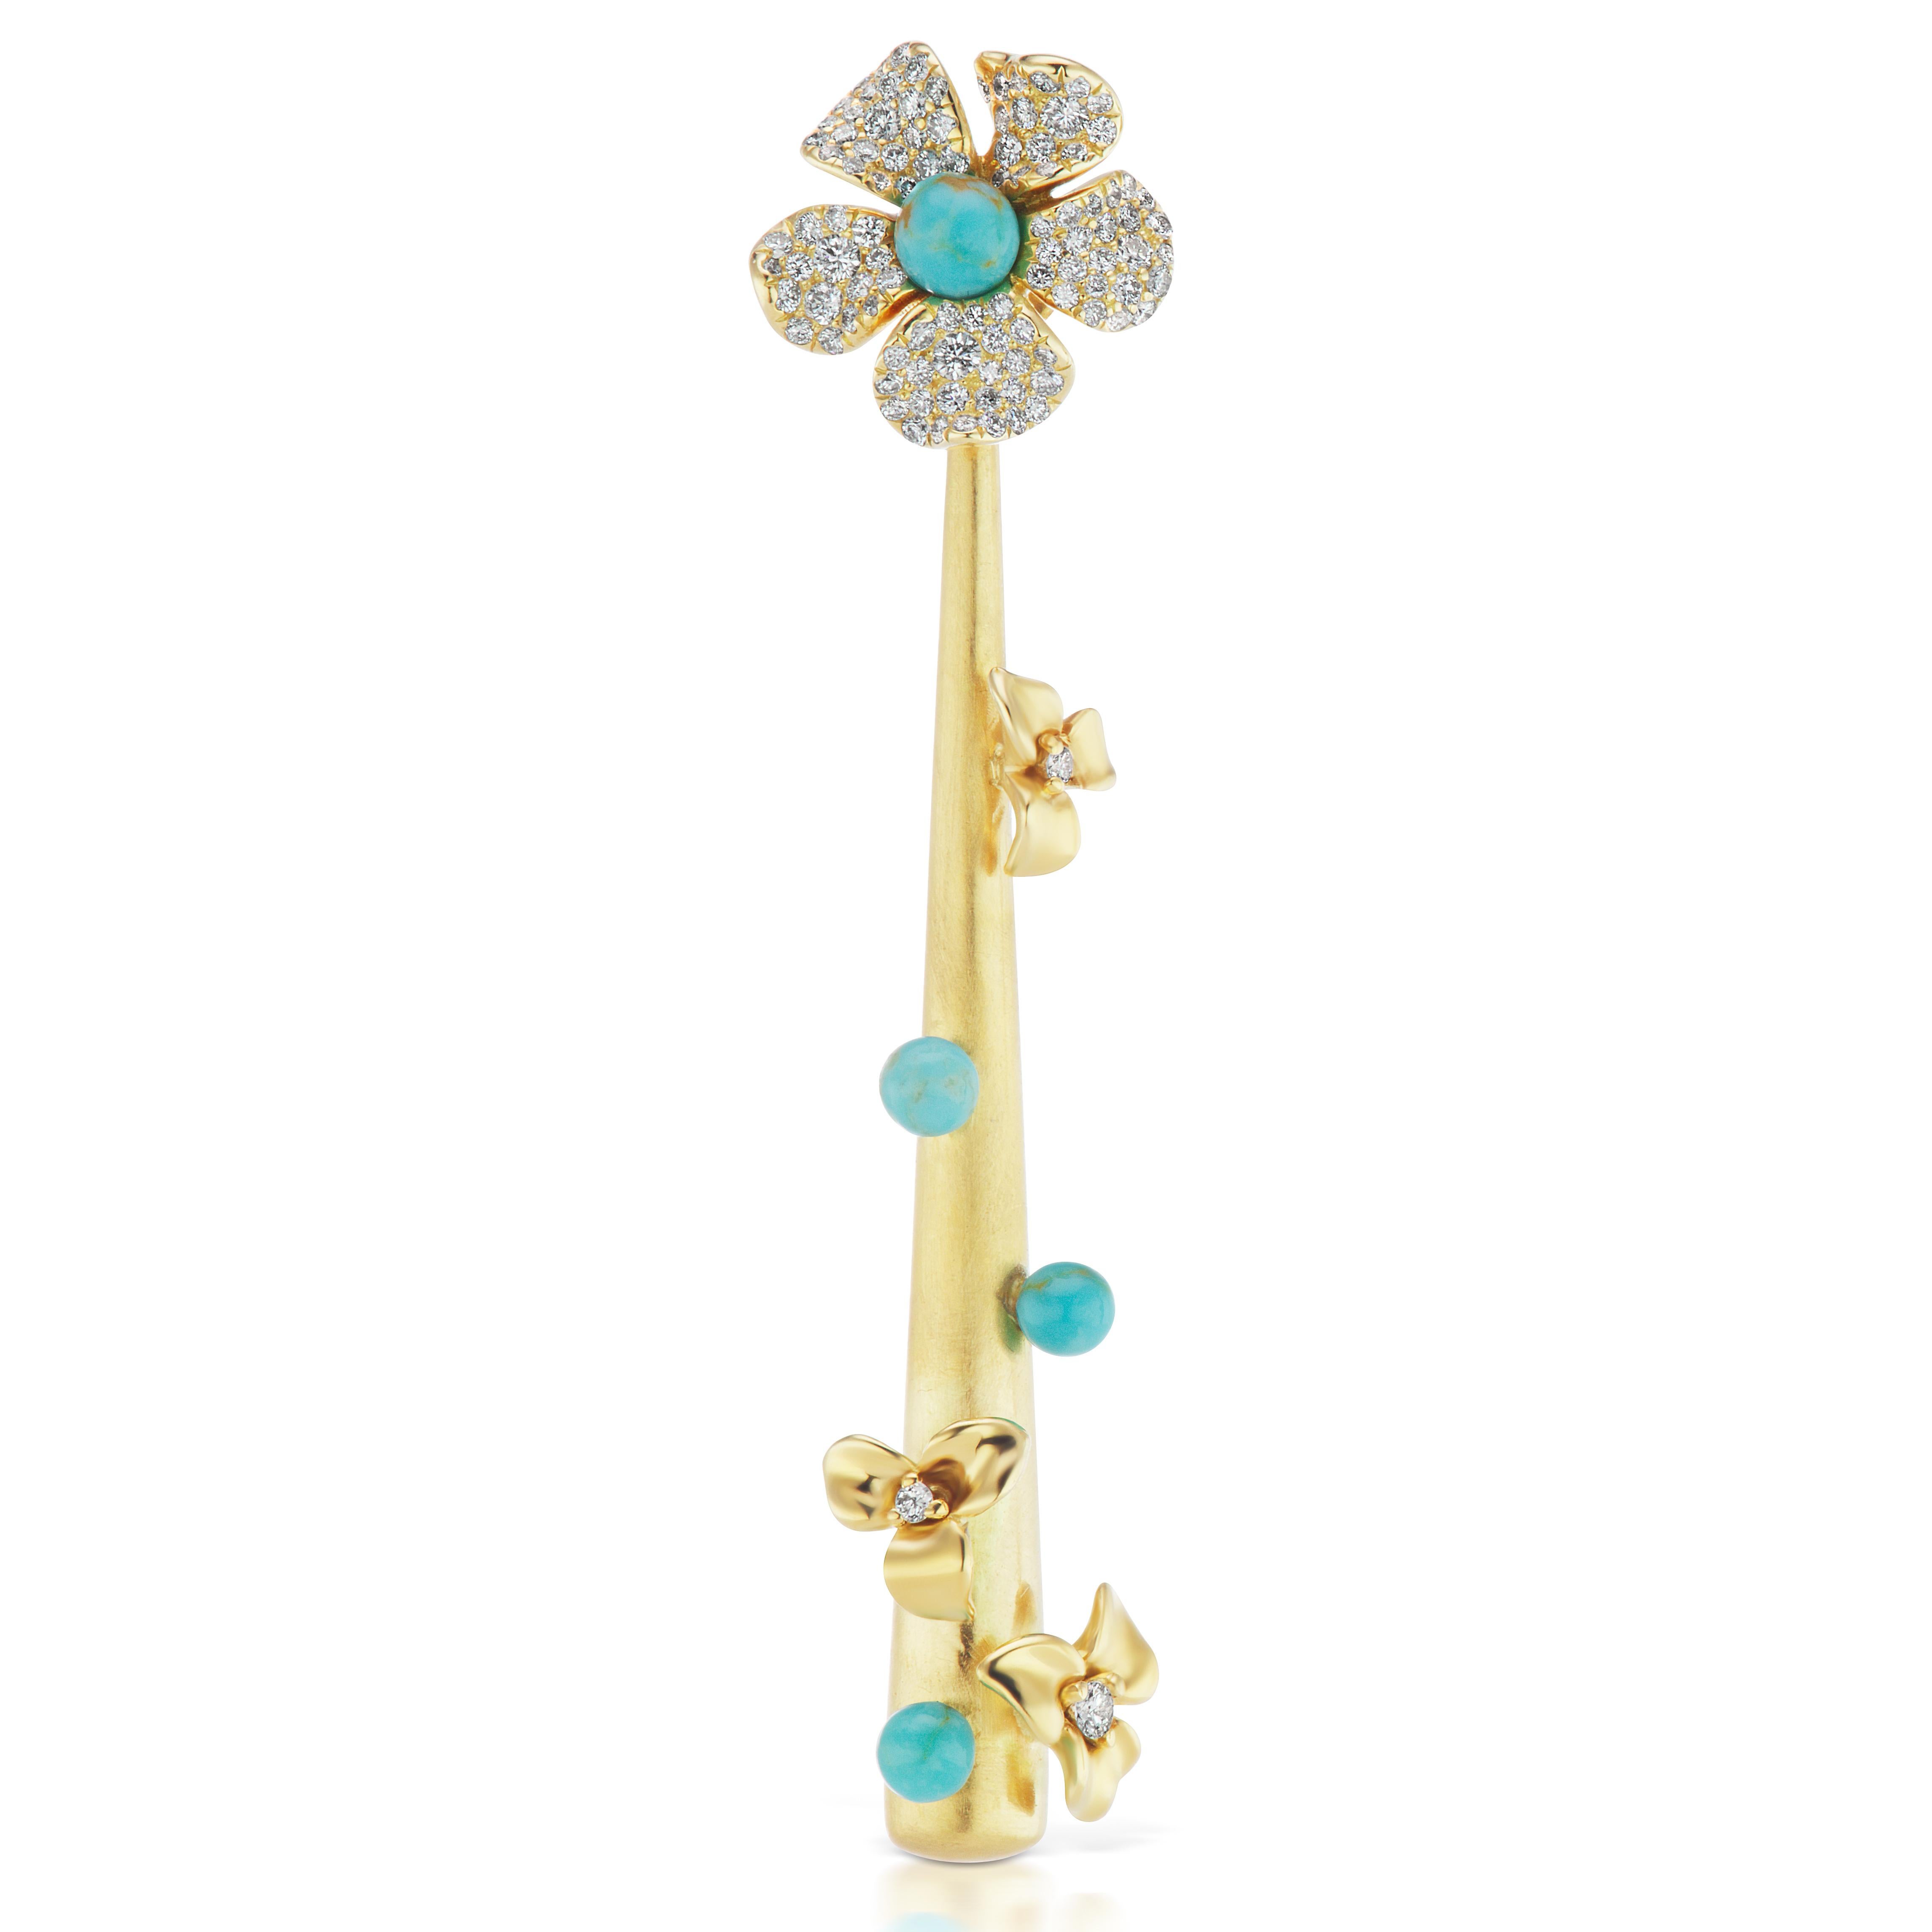 18K Yellow Gold Drop Earrings with Diamond and Turquoise accents.
0.852 diamond tcw.
Diamond Quality G VS1.
1.75